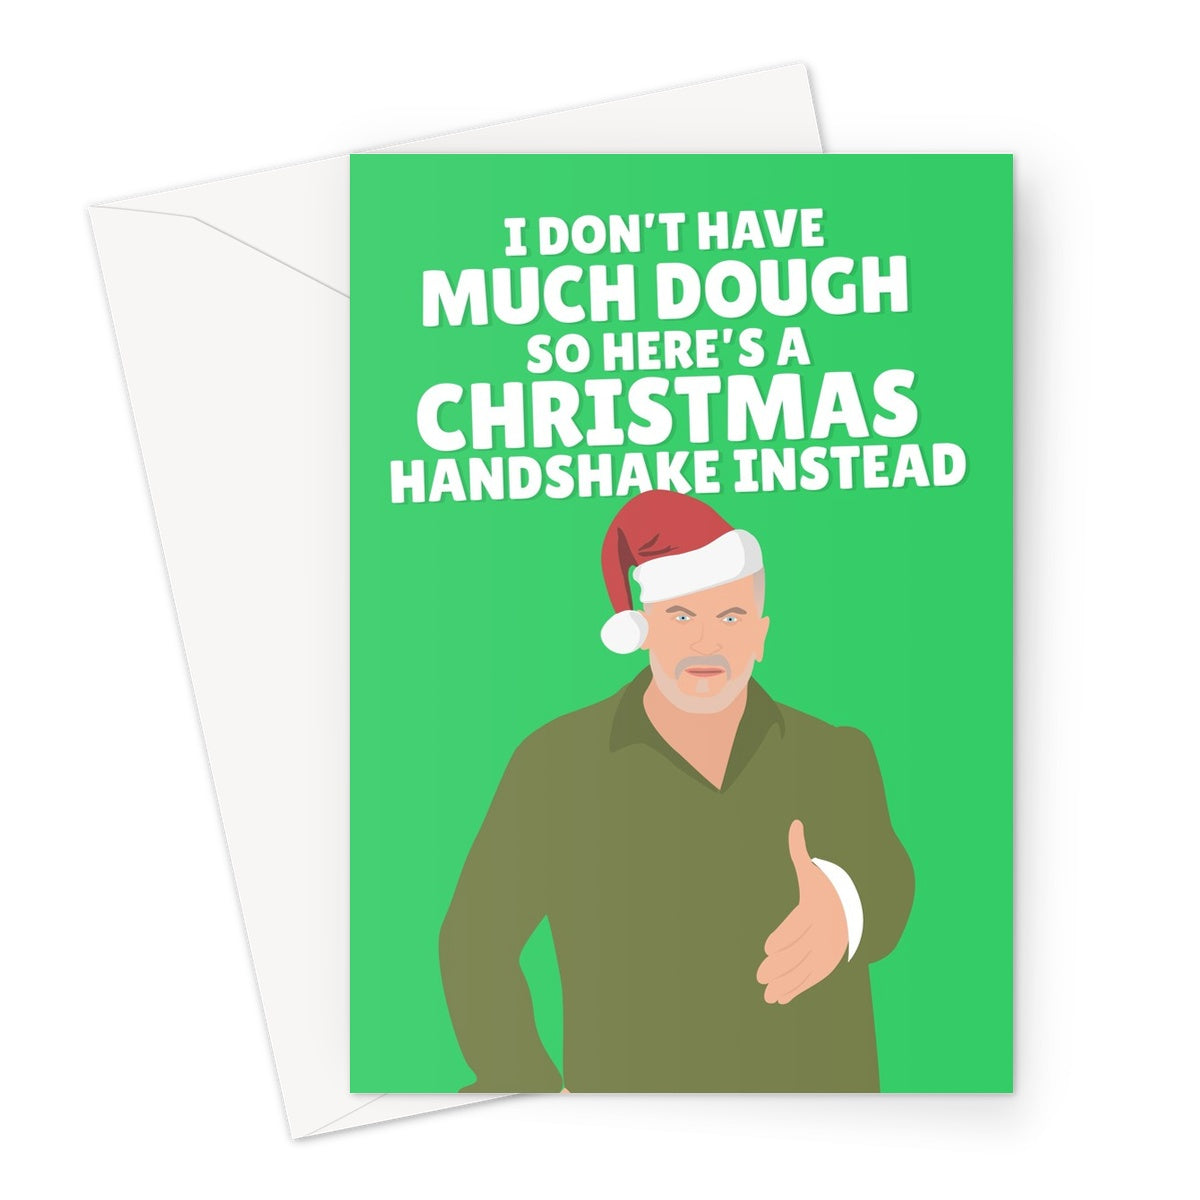 I Don't Have Much Dough So Here's a Christmas Handshake Instead Funny TV Fan Paul Hollywood Baking Cost of Living Greeting Card